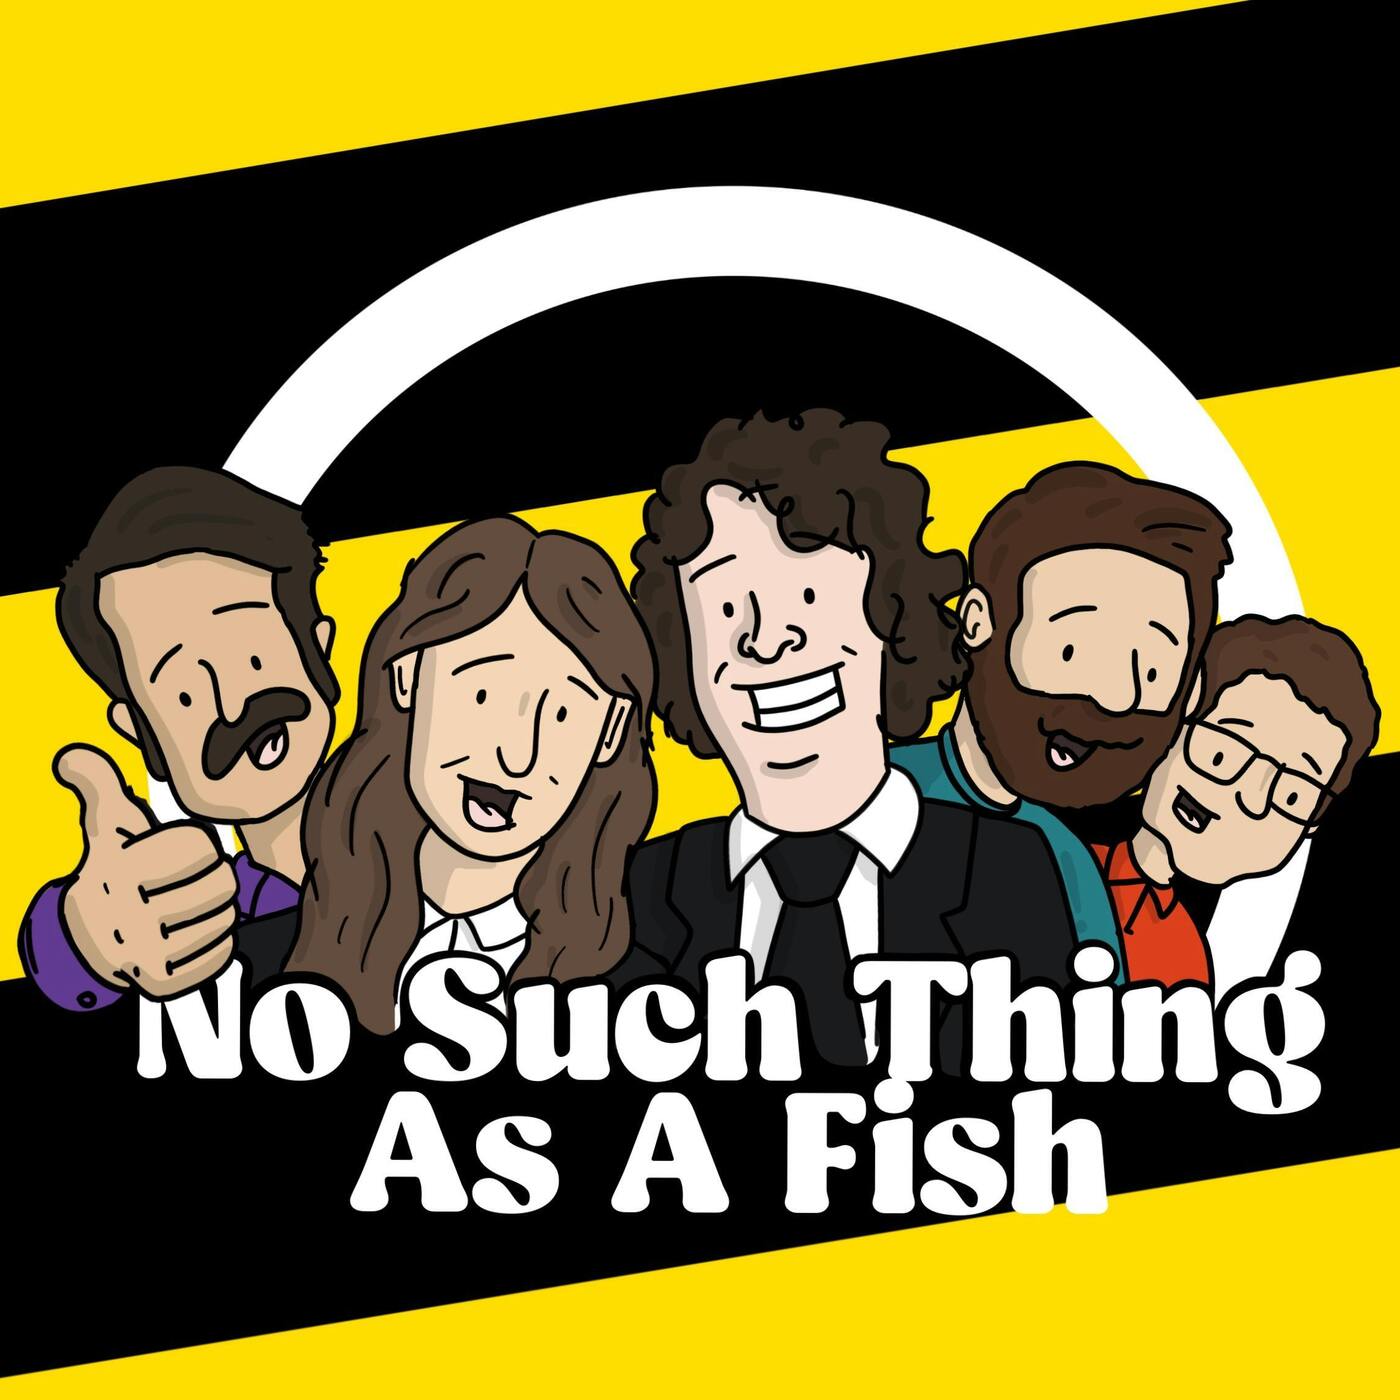 Episode 186, Part 2: No Such Thing As A Fish